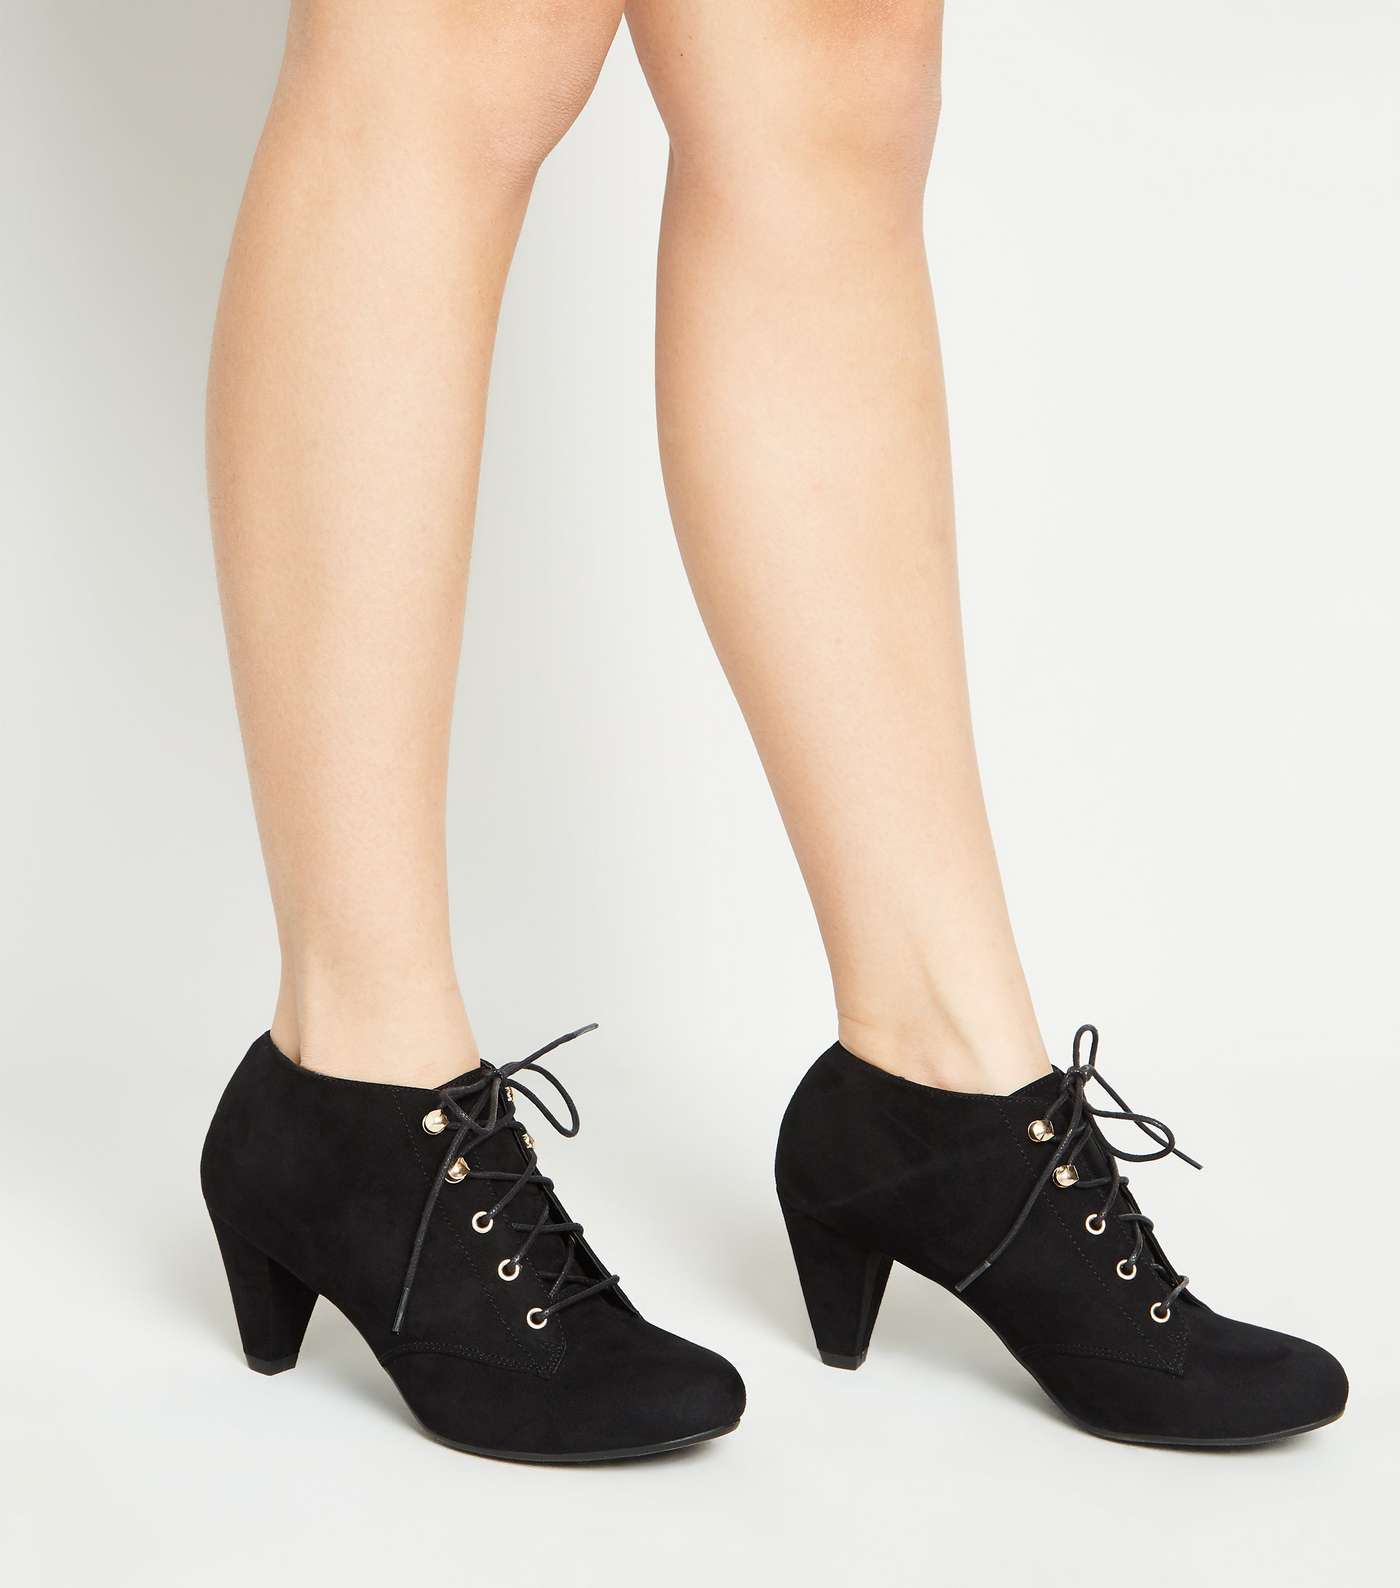 Girls Black Suedette Lace-Up Cone Heels Image 2